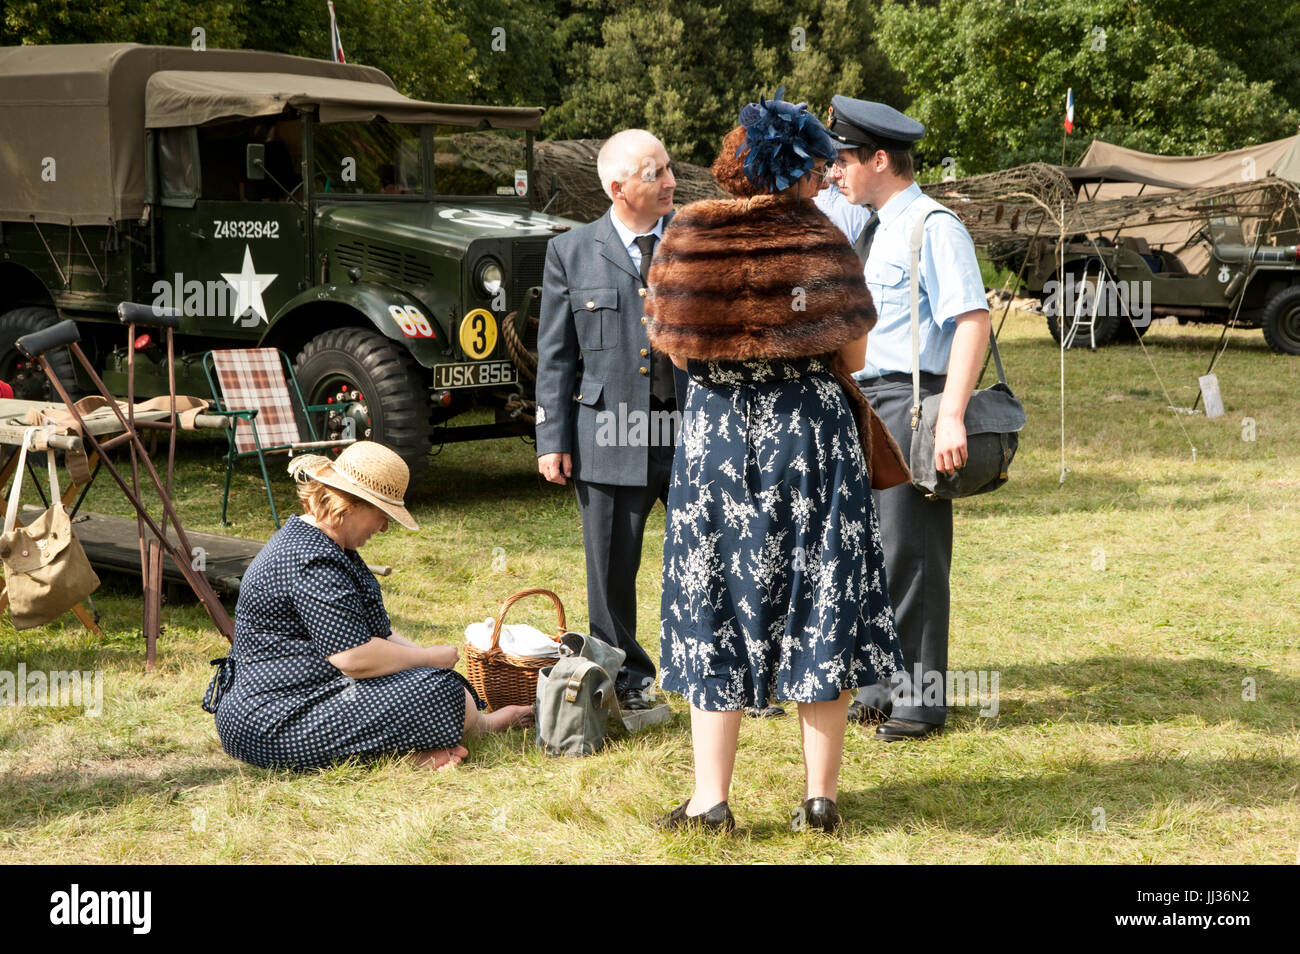 Images taken from WW2 re-enactment of Home Guard using authentic clothing, vehicles, flags, ammunition, guns, bikes, tents and other paraphernalia. Stock Photo